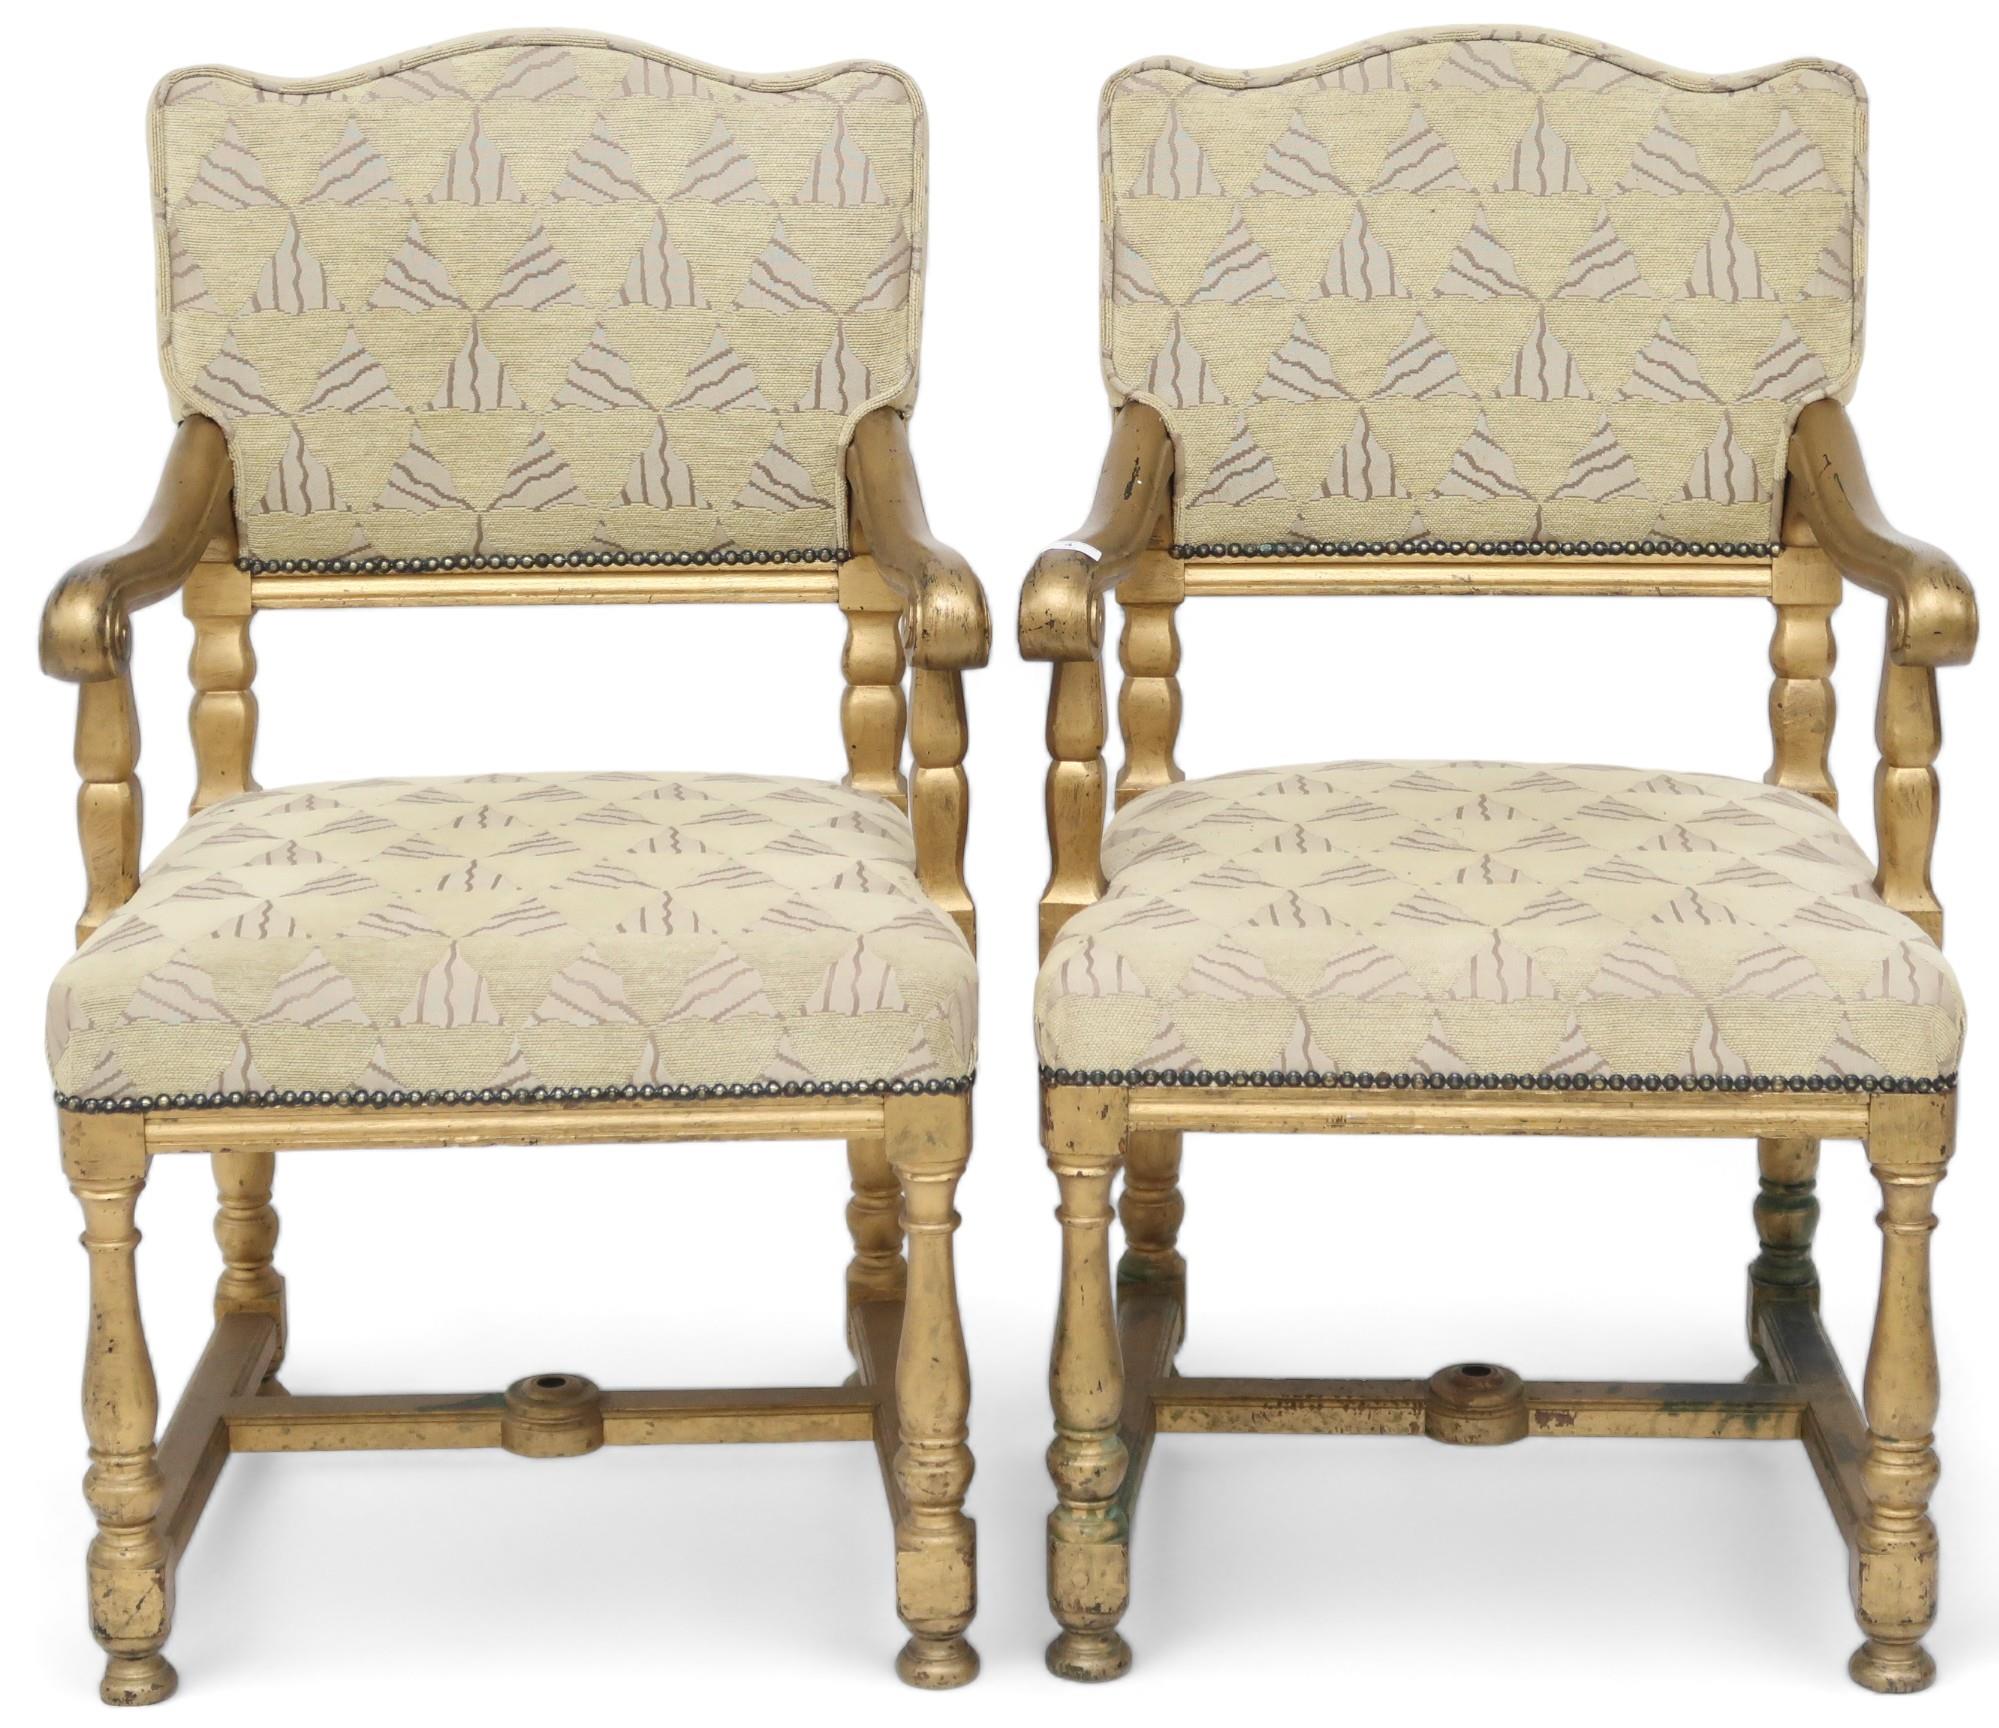 A pair of early 20th century gilt framed theatre seats with beige geometric upholstery, scrolled